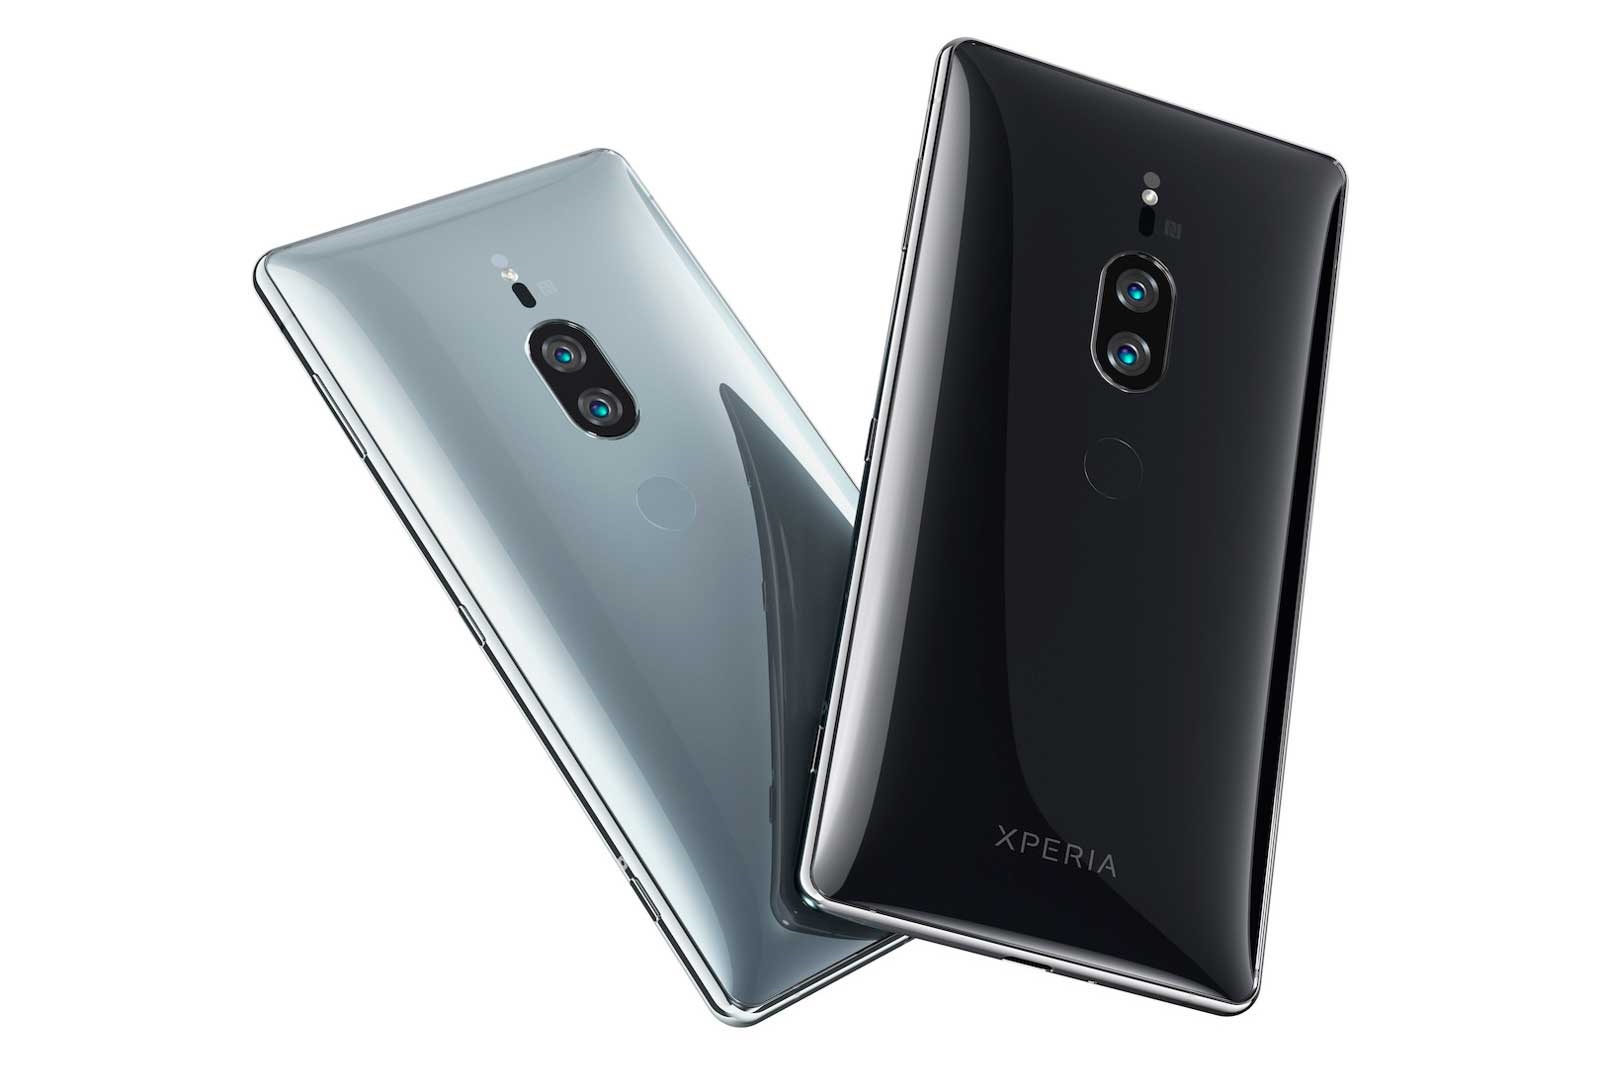 Sony's $999 Xperia XZ2 Premium pre-order includes $279 earbuds | DeviceDaily.com